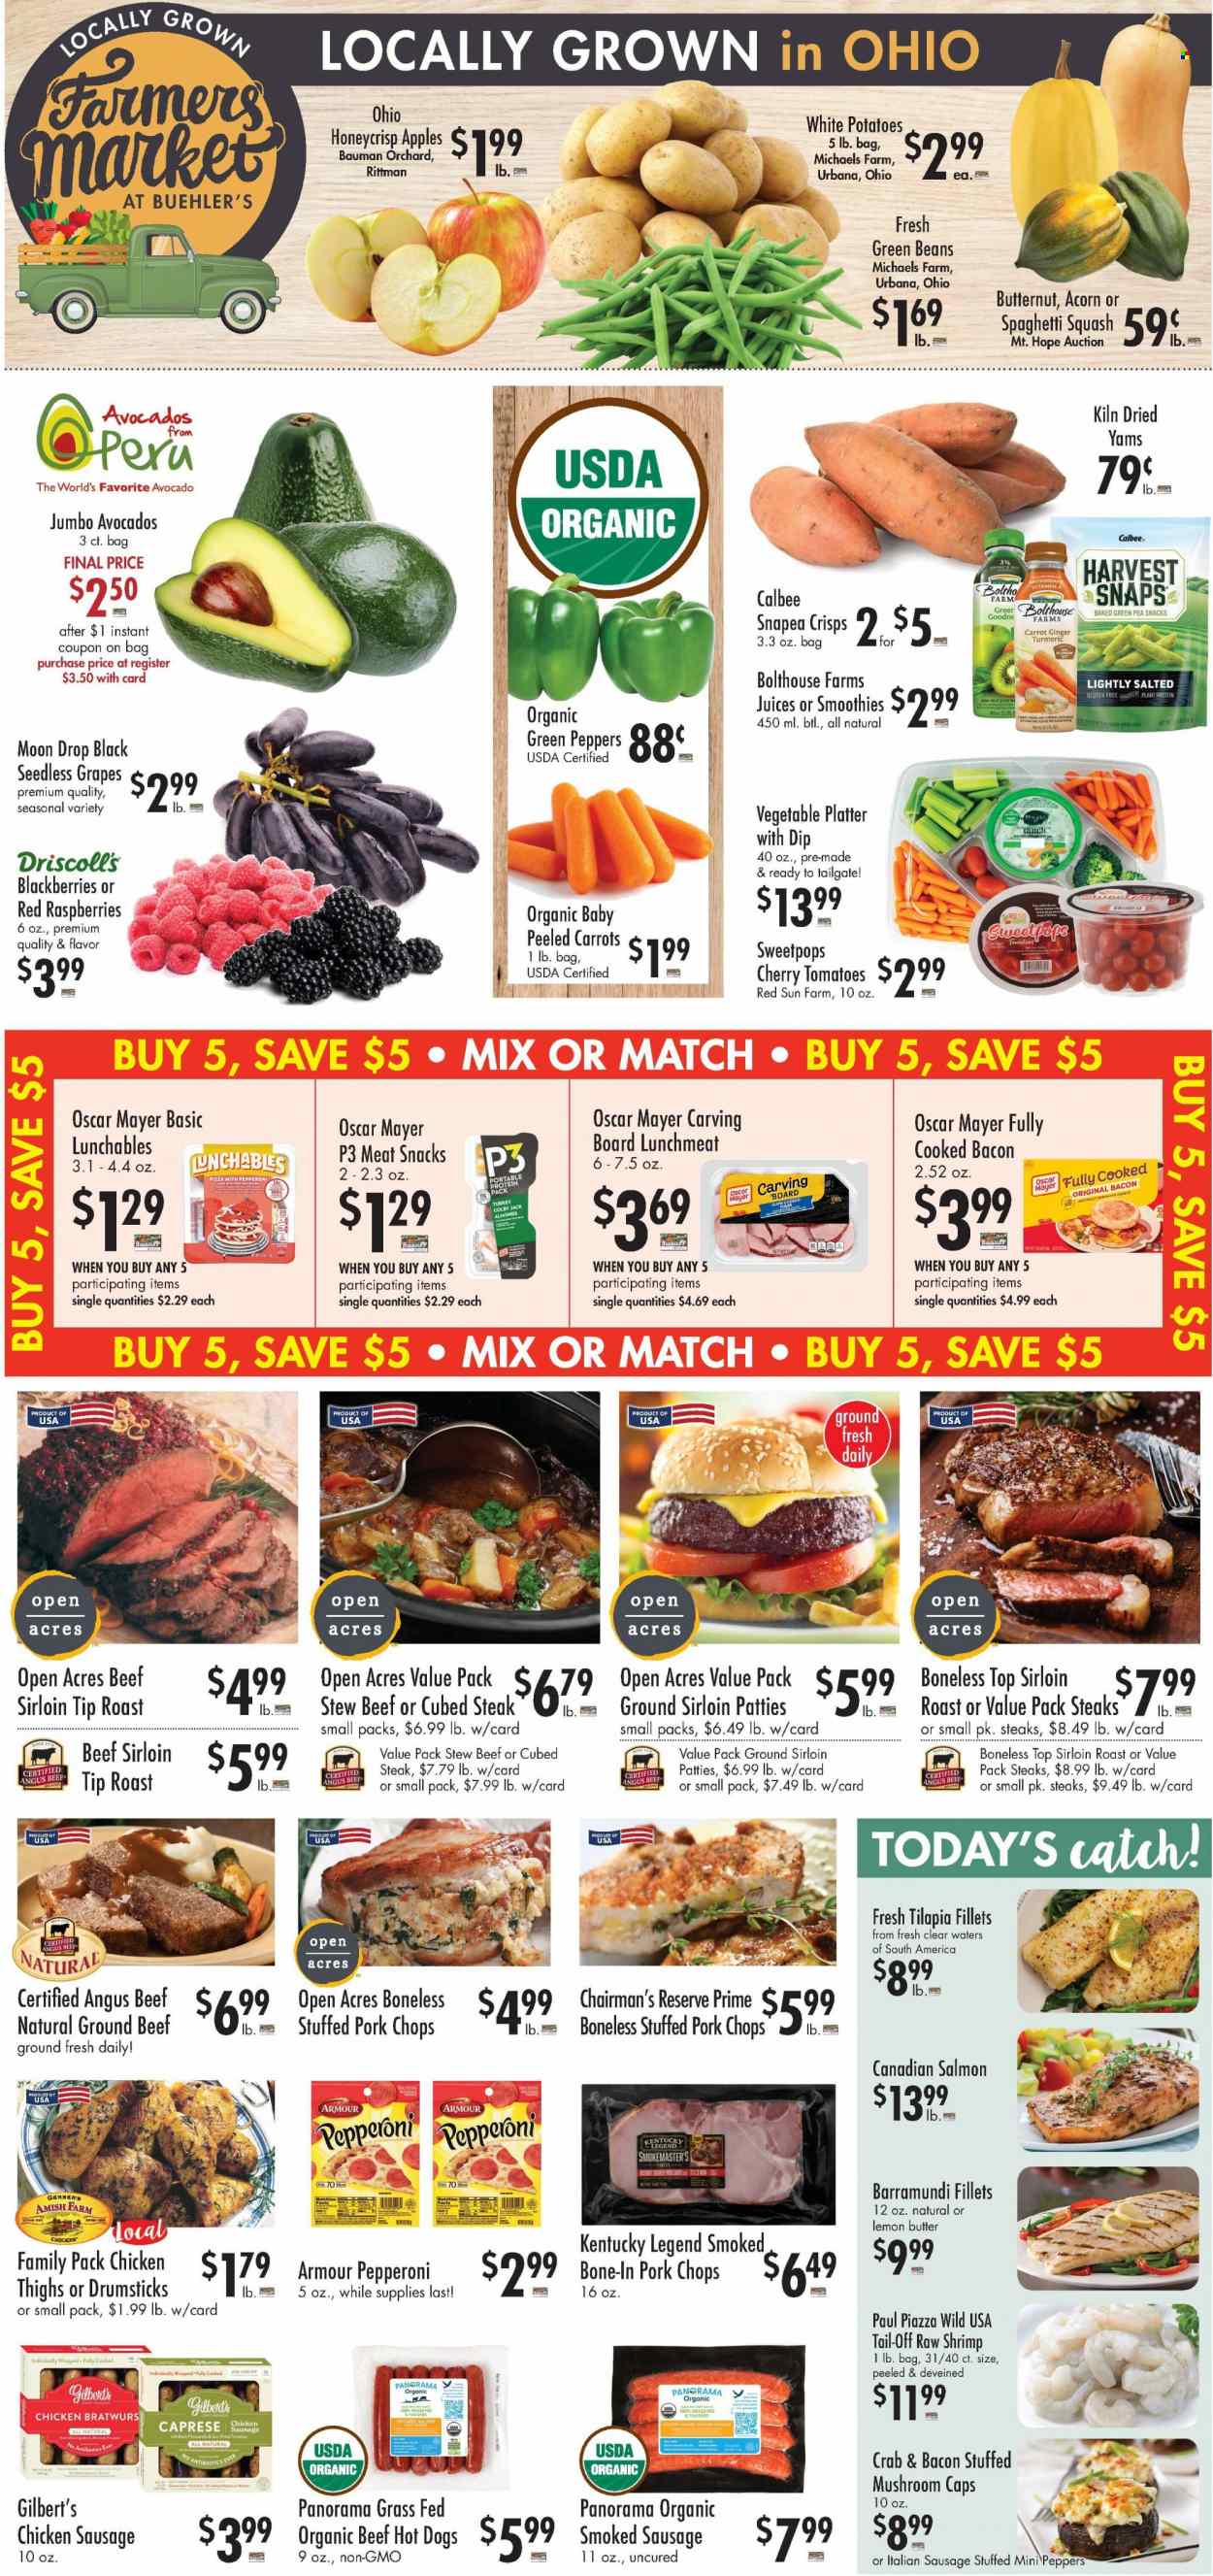 thumbnail - Buehler's Flyer - 09/28/2022 - 10/04/2022 - Sales products - beans, carrots, ginger, green beans, peppers, apples, avocado, blackberries, grapes, seedless grapes, cherries, barramundi, salmon, tilapia, crab, shrimps, hot dog, pizza, Lunchables, bacon, Oscar Mayer, sausage, smoked sausage, pepperoni, chicken sausage, italian sausage, Gilbert’s, lunch meat, Colby cheese, butter, dip, snack, potato chips, chips, plant protein, Harvest Snaps, dried tomatoes, turmeric, juice, fruit juice, beef meat, beef sirloin, ground beef, steak, pork chops, pork meat, pot. Page 6.